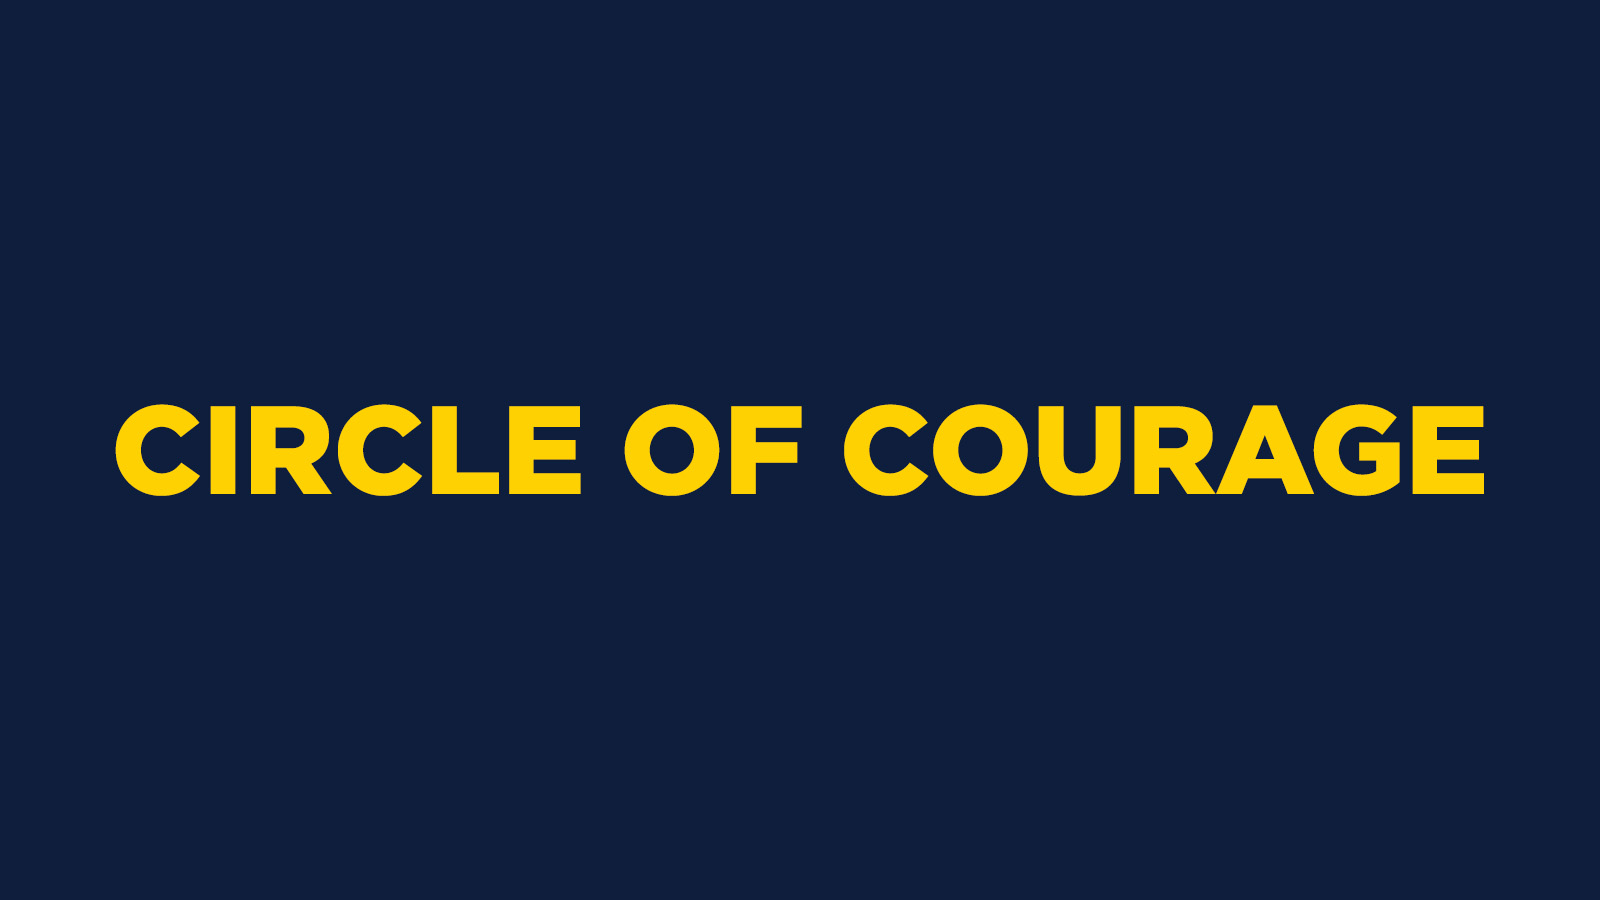 CIRCLE OF COURAGE